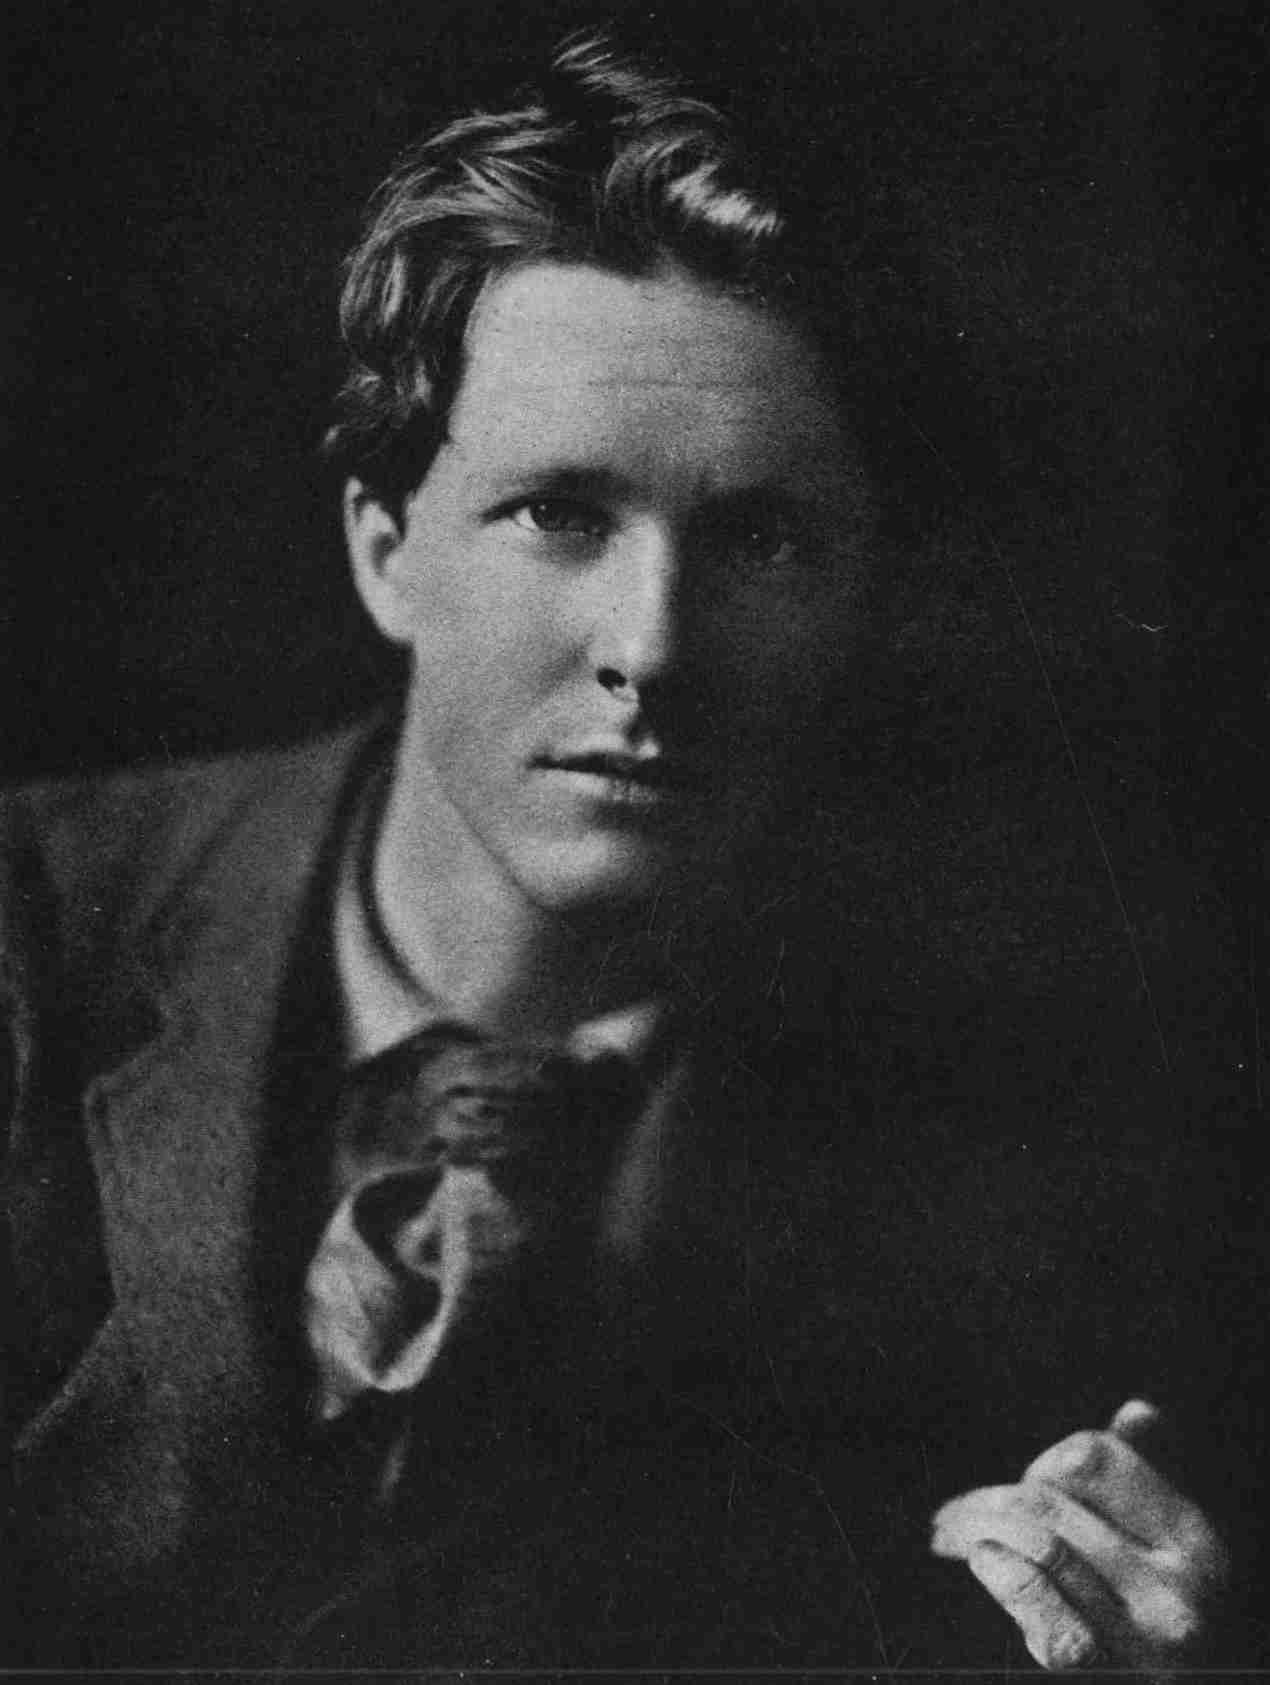 The Distributed Proofreaders Canada eBook of Red Wine of Youth: A Life of  Rupert Brooke by Arthur Stringer